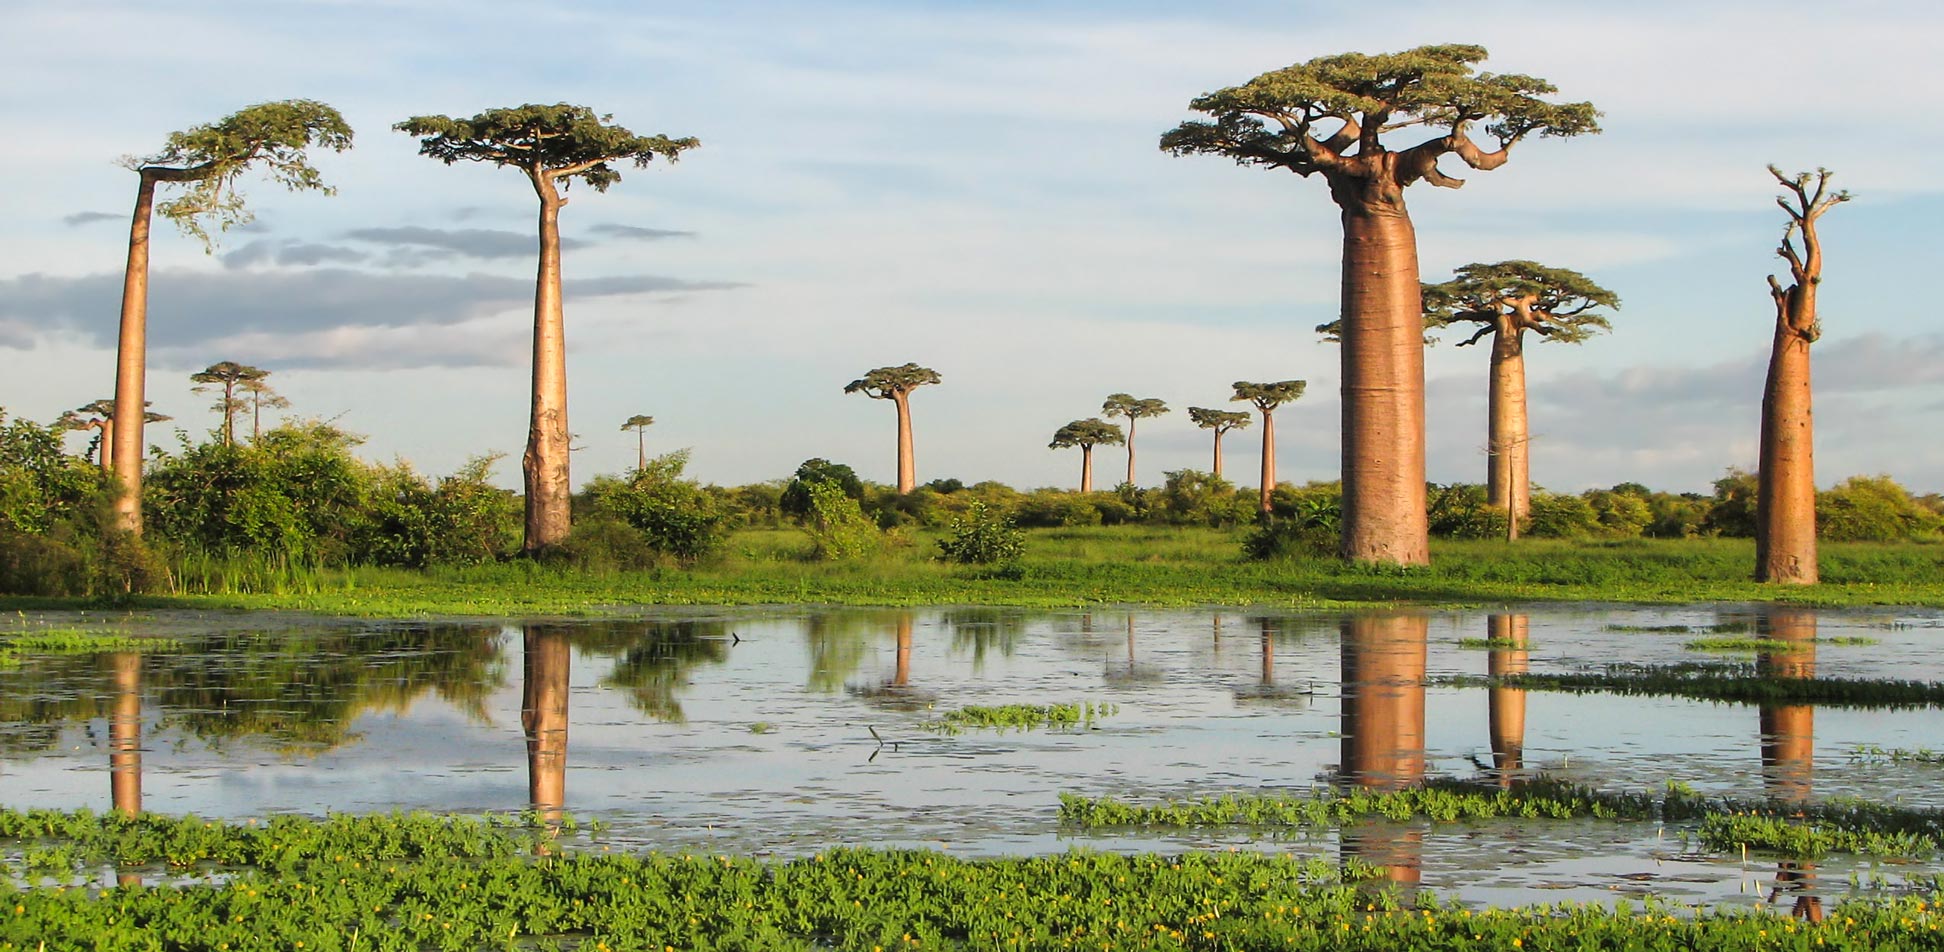  Avenue of the Baobabs (Allee des Baobabs) in Madagascar